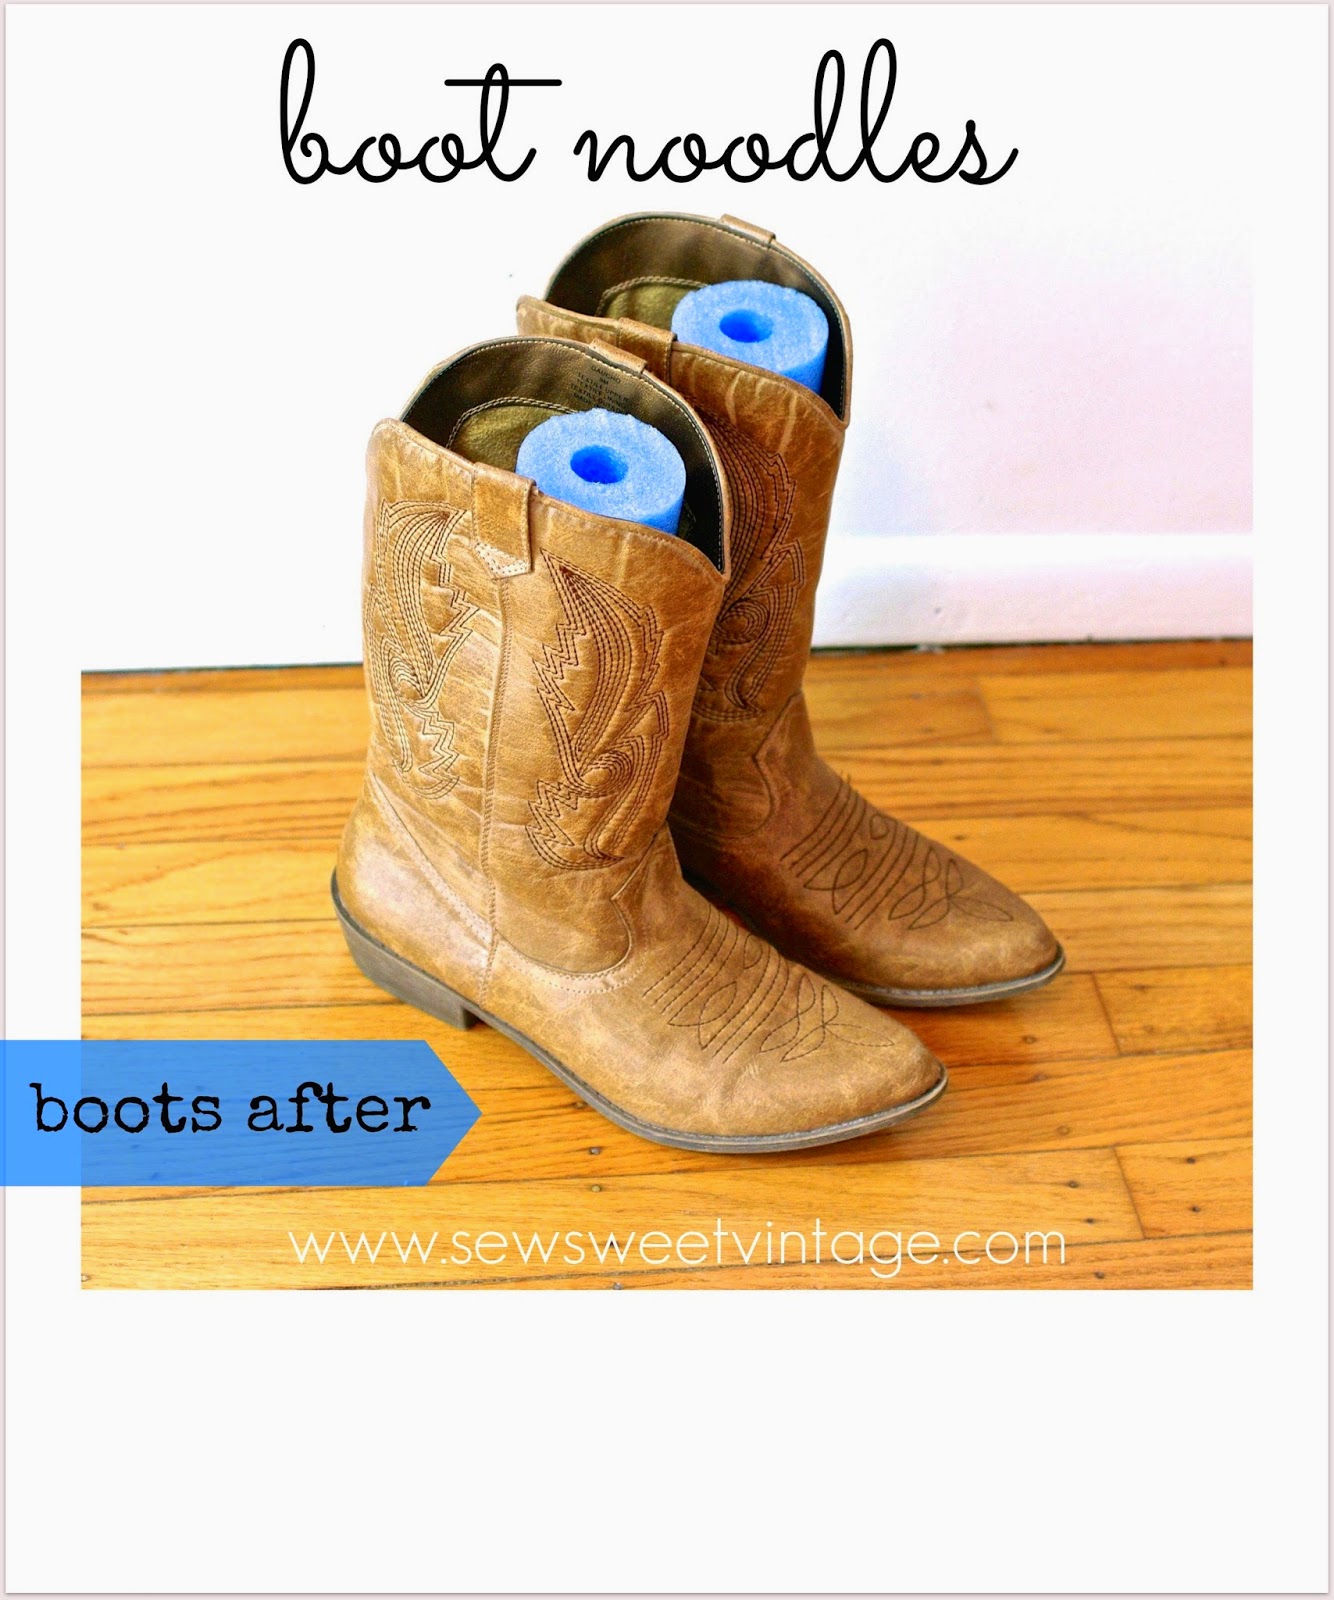 organize boots with pool noodles